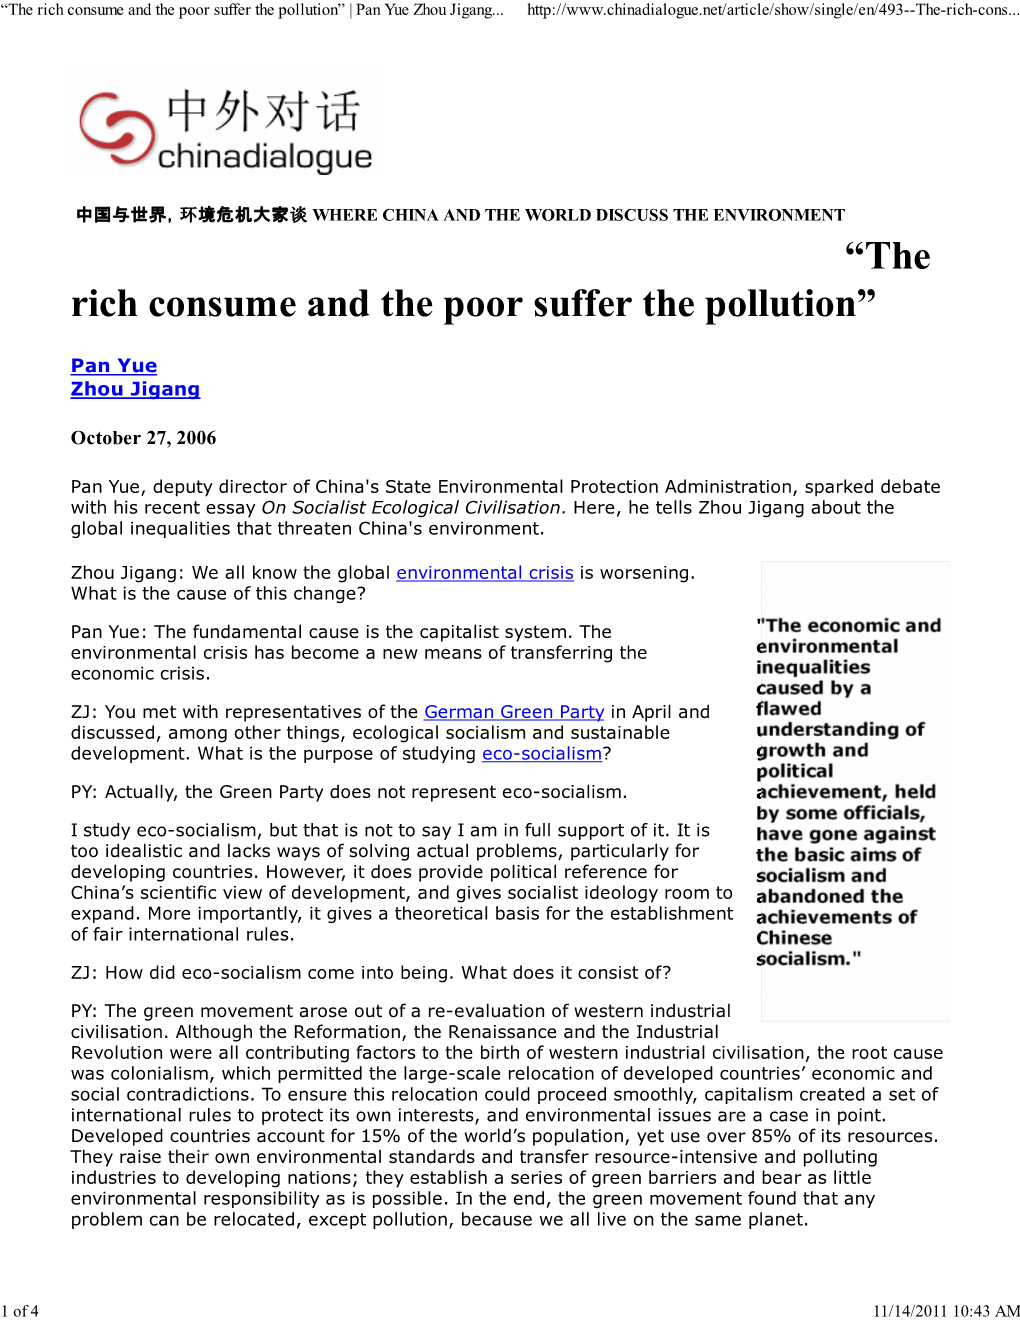 “The Rich Consume and the Poor Suffer the Pollution” | Pan Yue Zhou Jigang